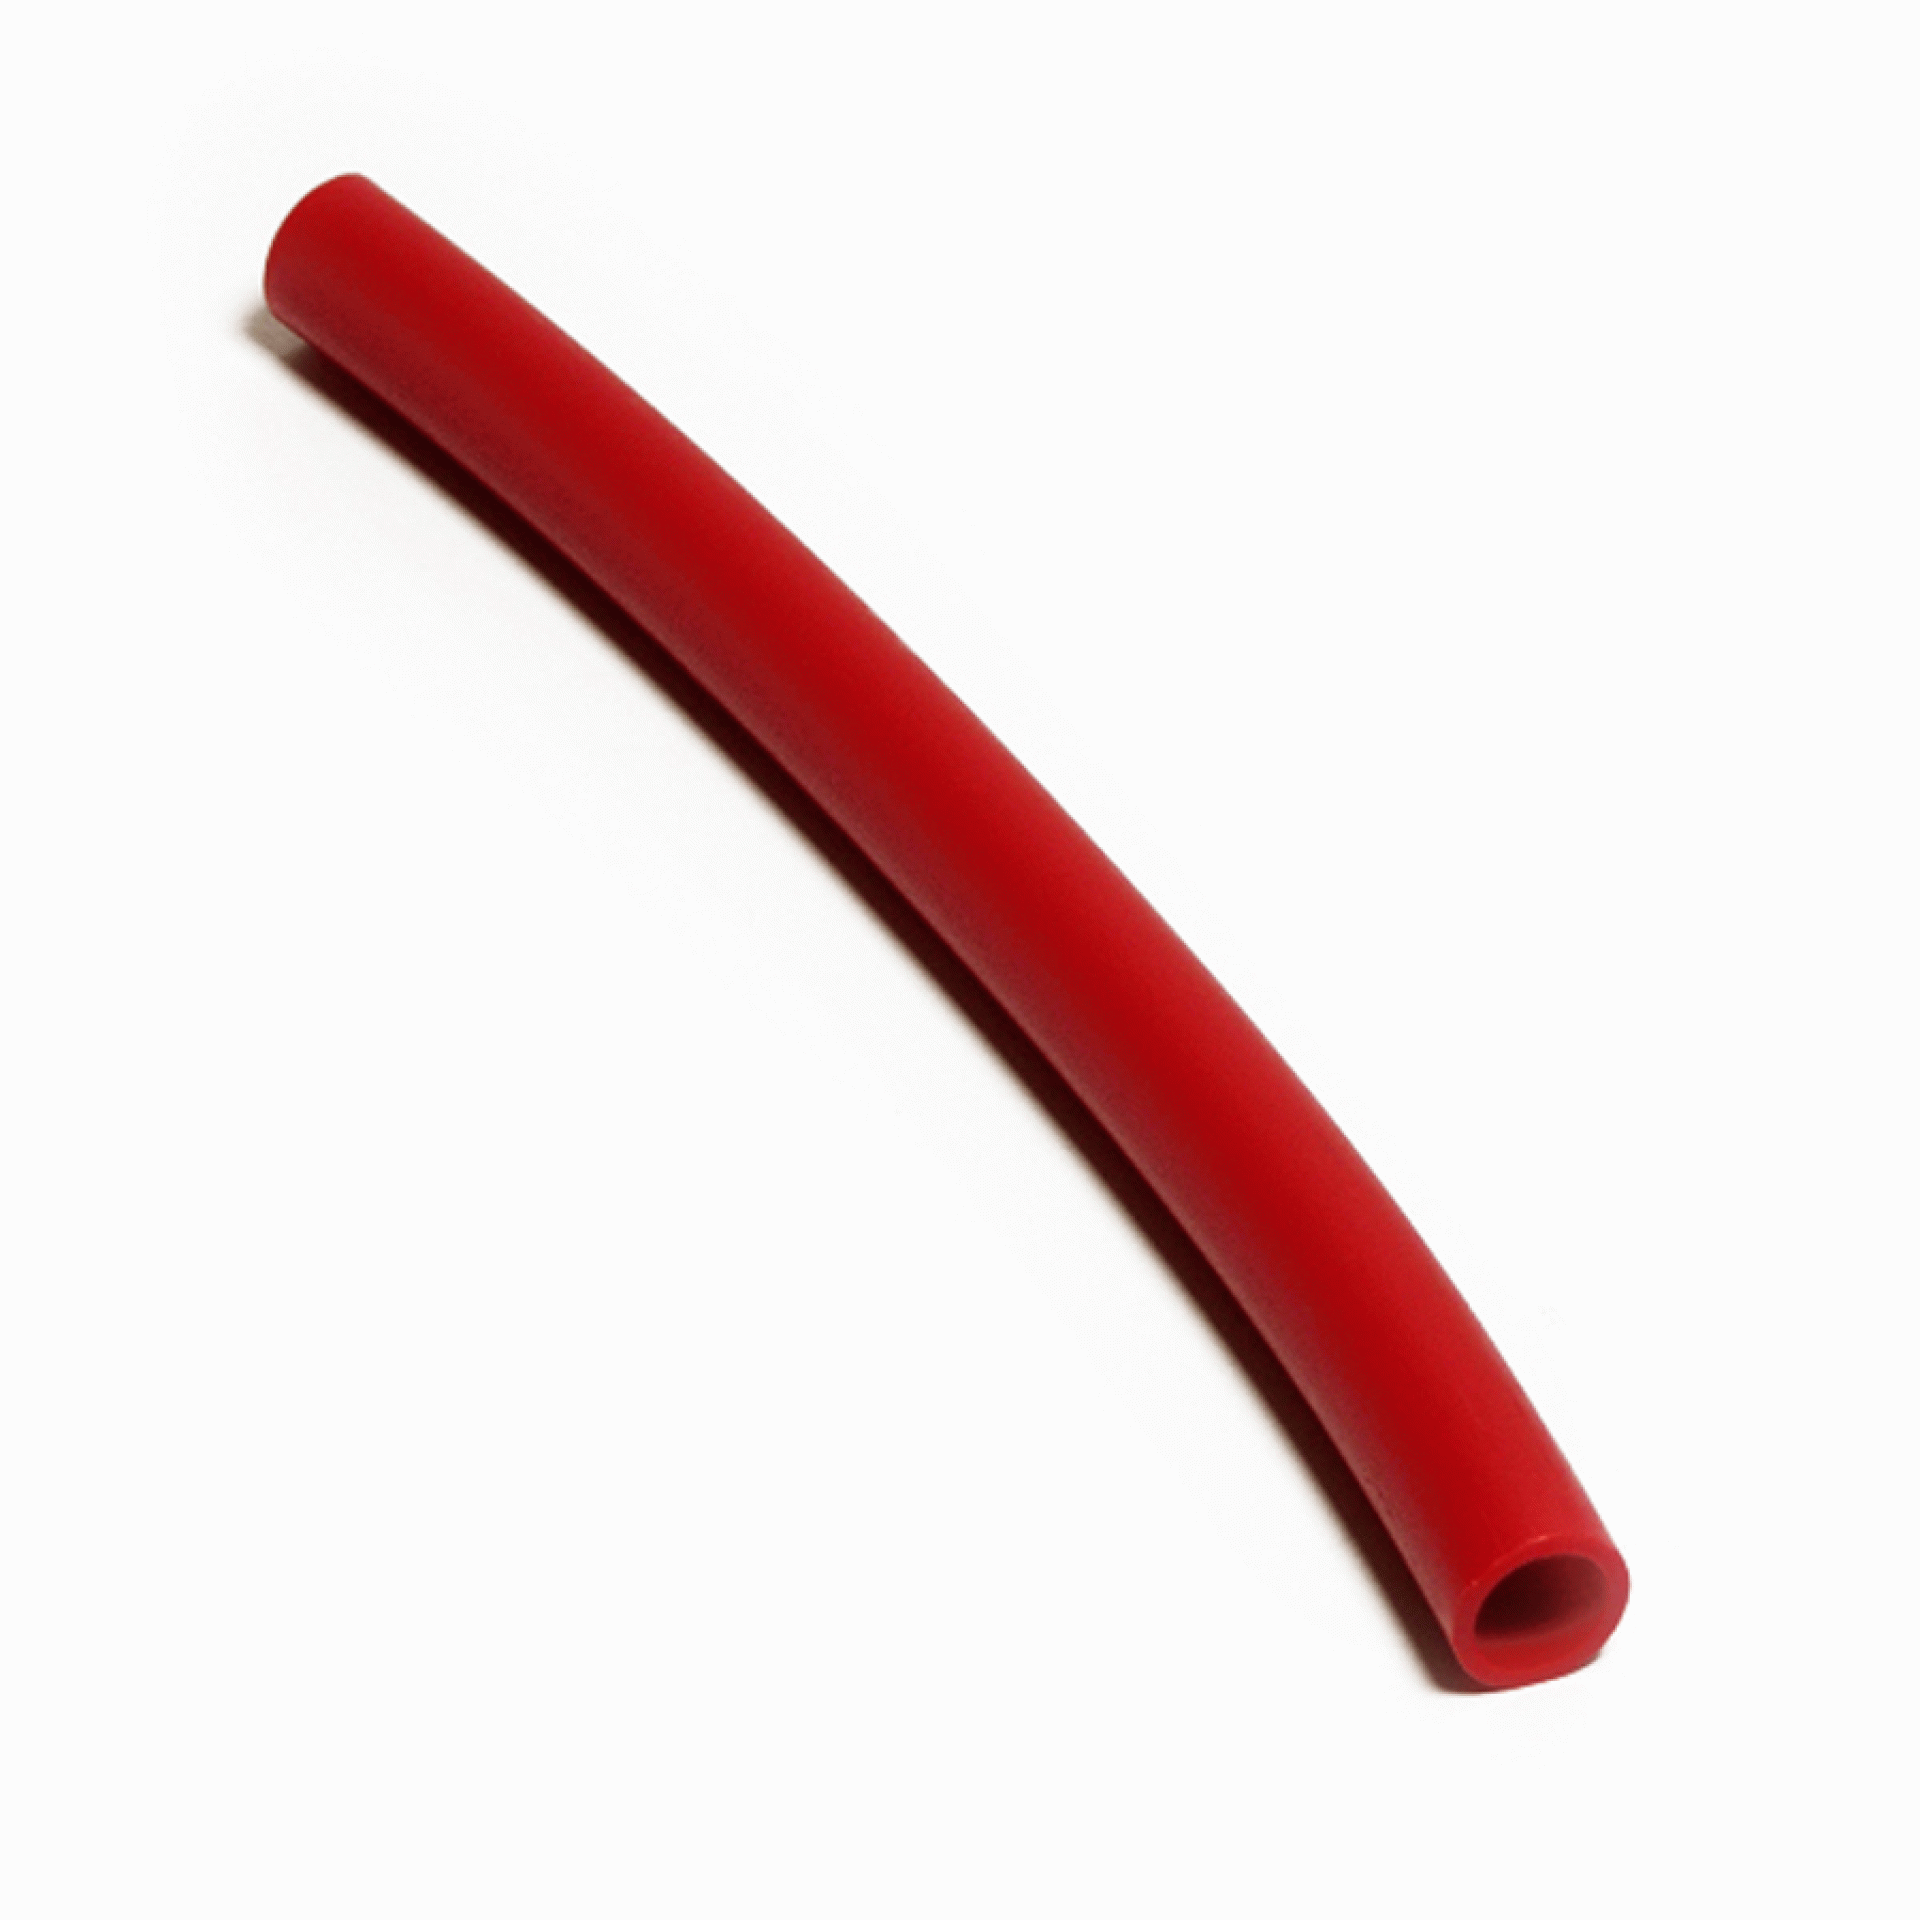 SEA TECH | 0650377 | WATERPEX Tubing 1/2" CTS X 100' - RED